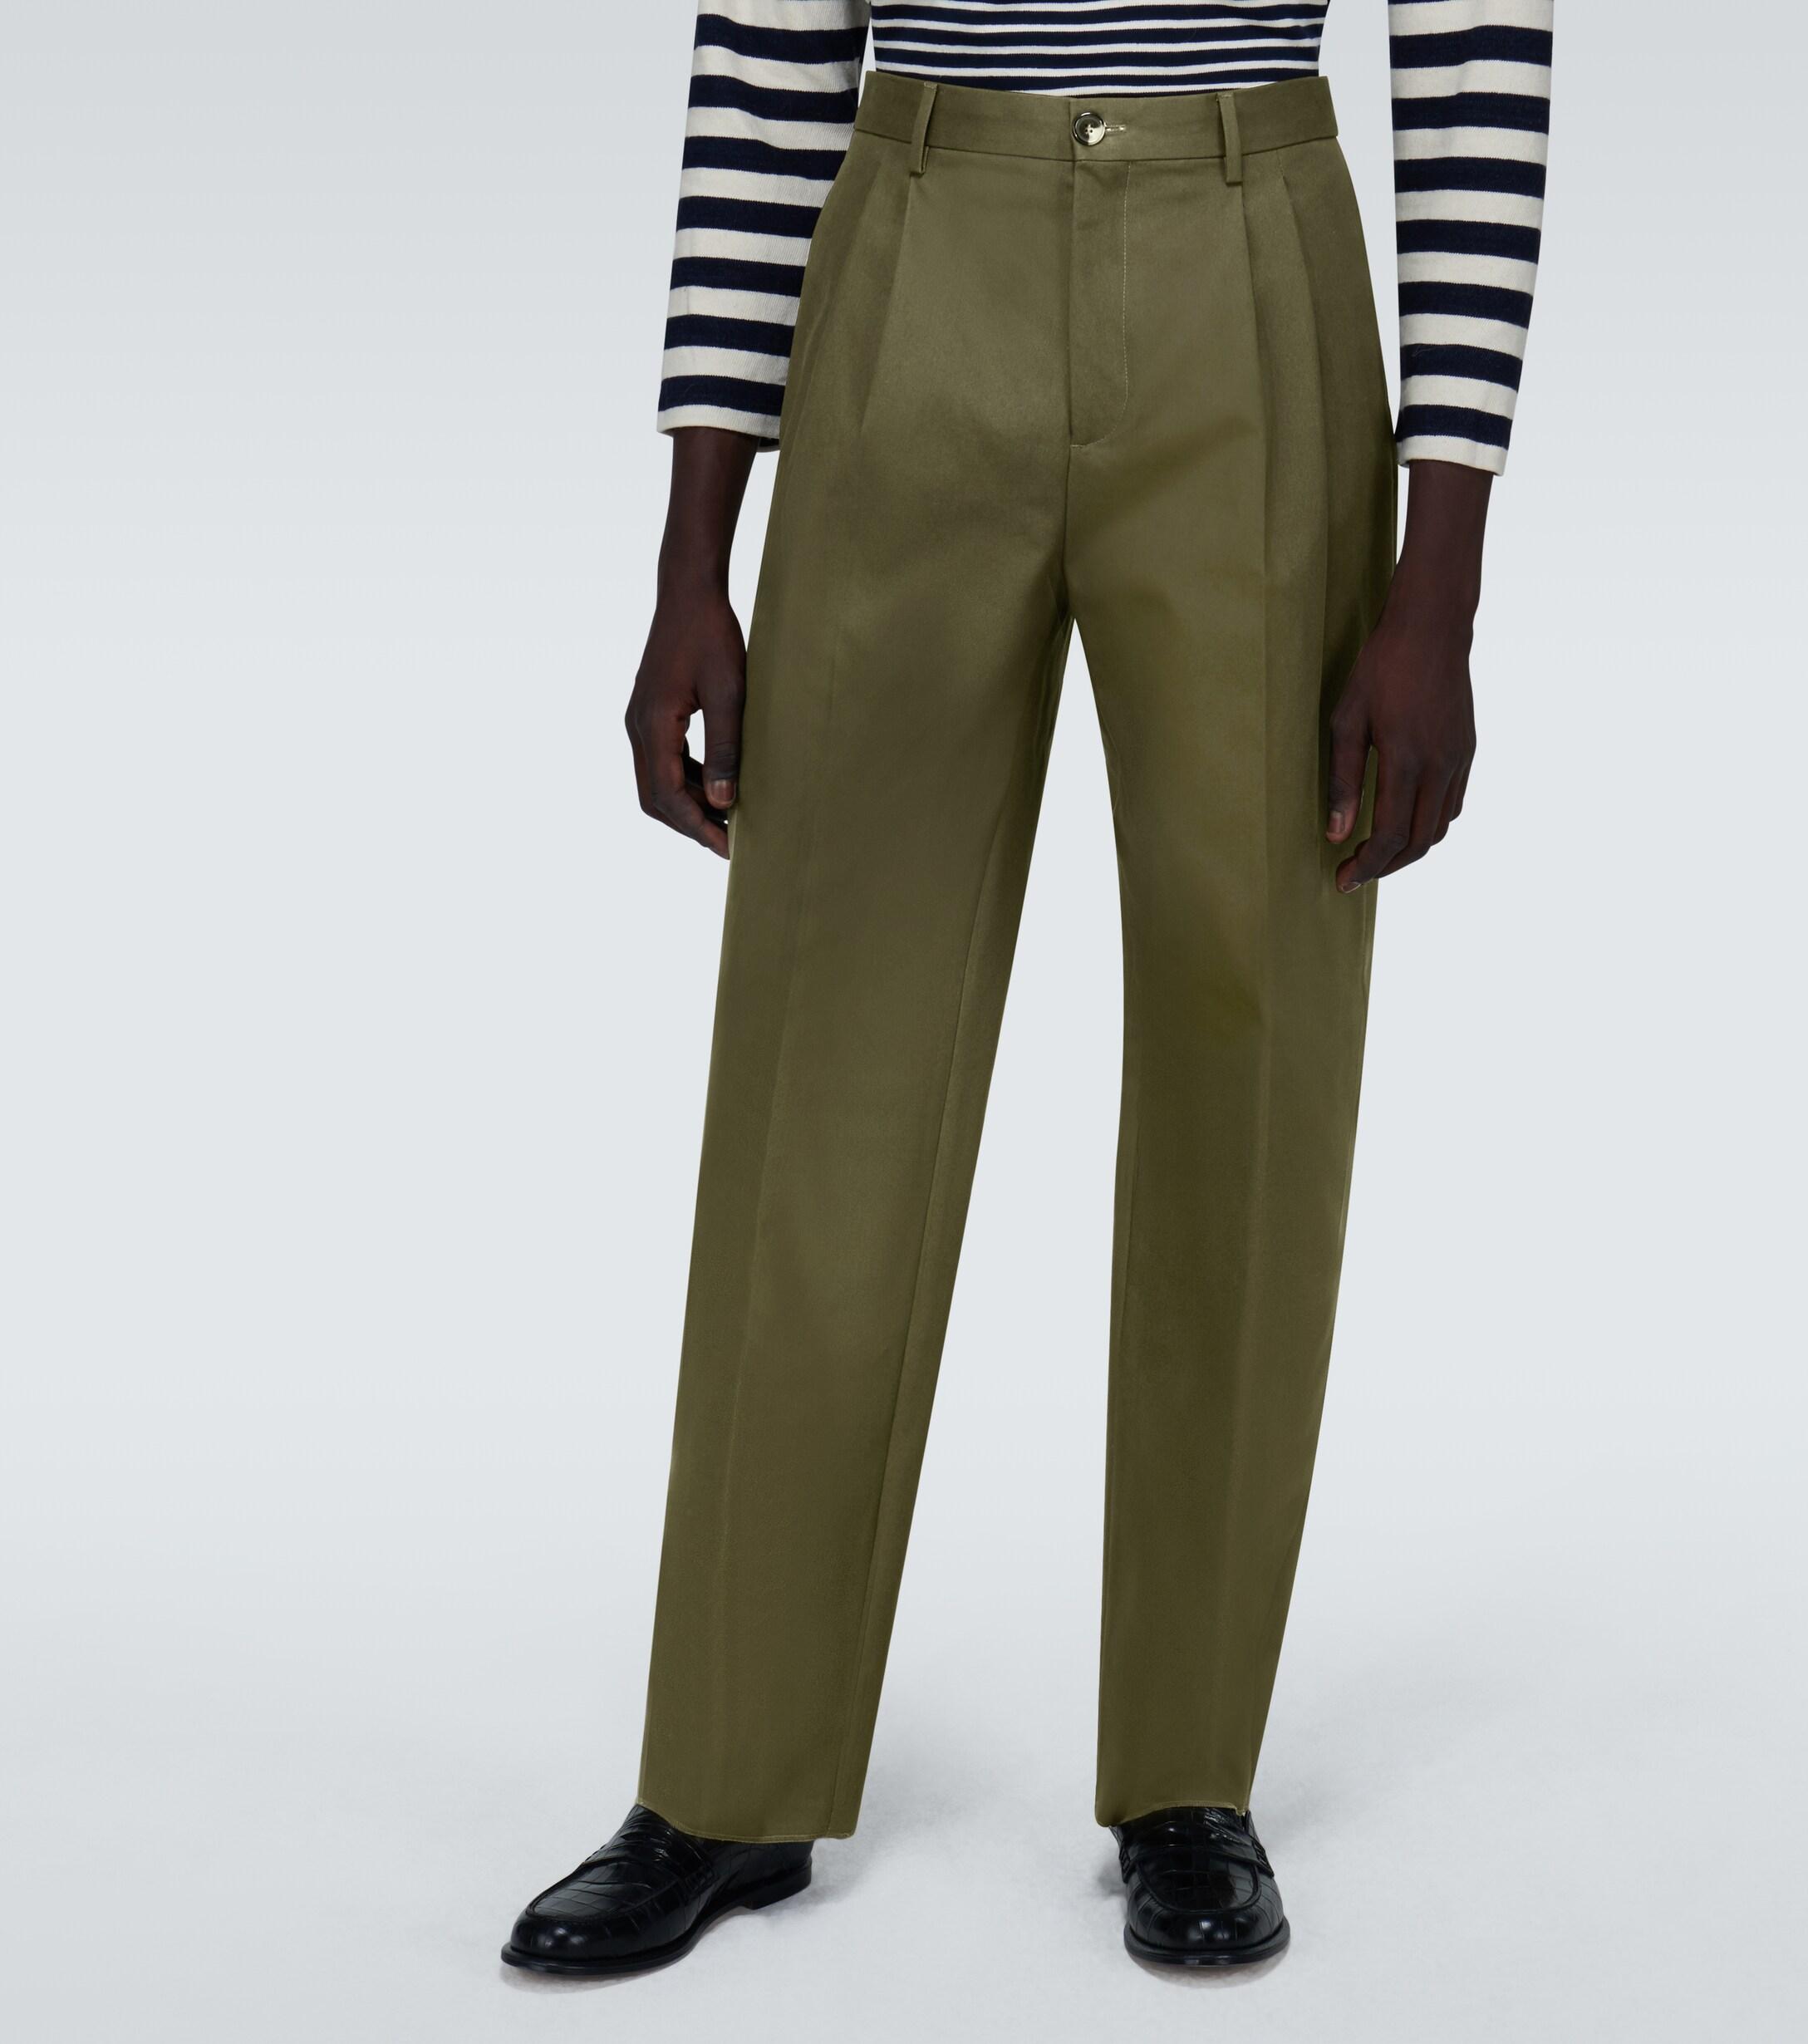 Loewe Double-pleated Cotton Pants in Green for Men - Lyst